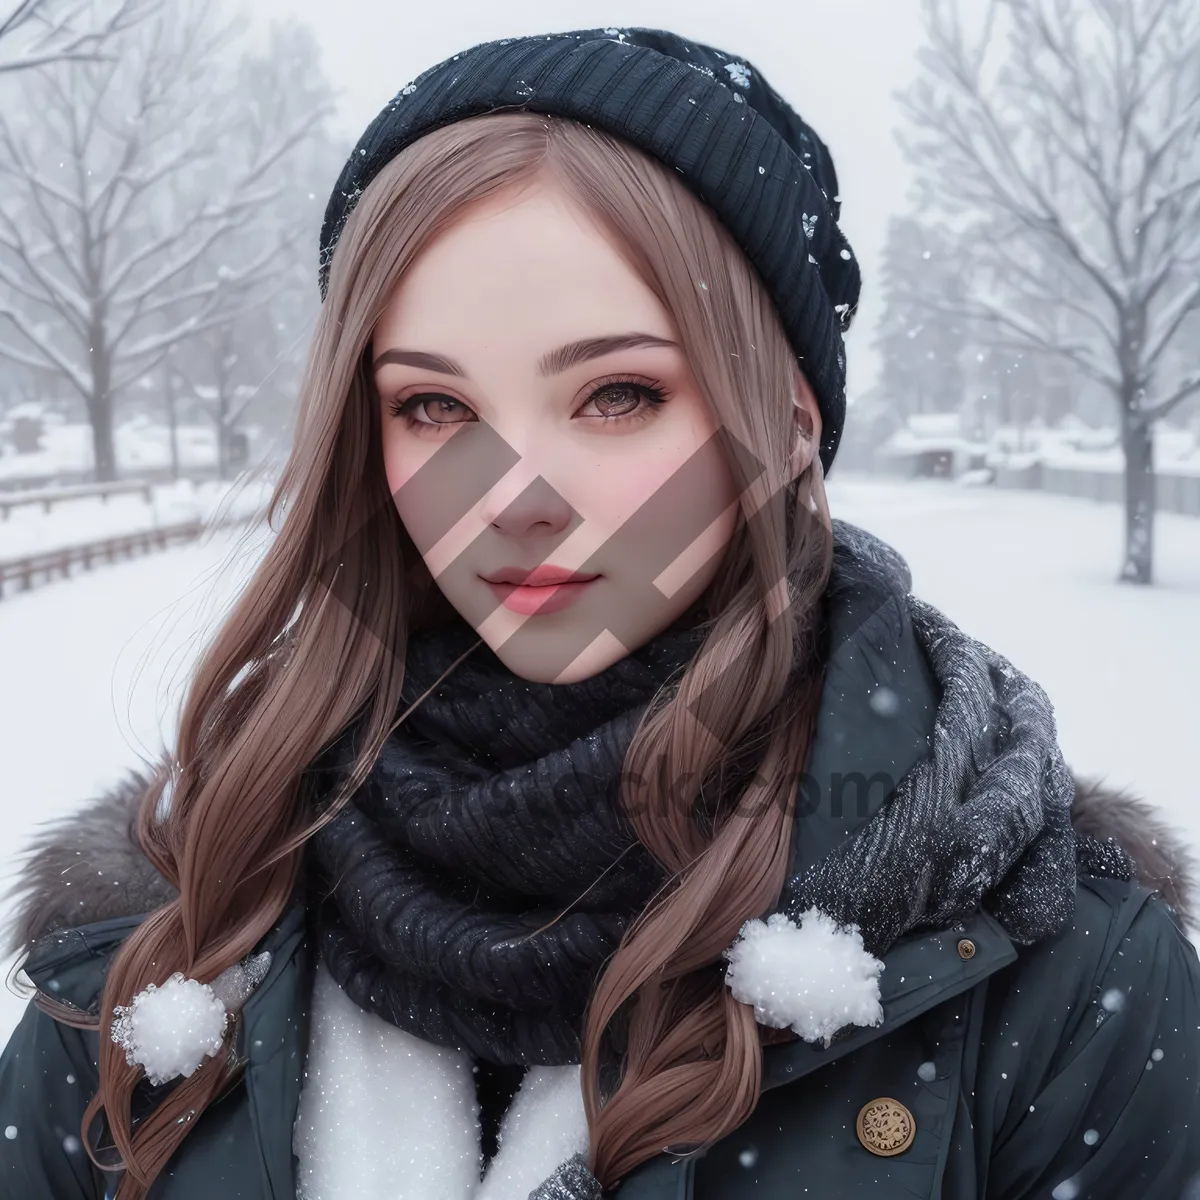 Picture of Smiling Winter Lady in Fashionable Jacket and Scarf